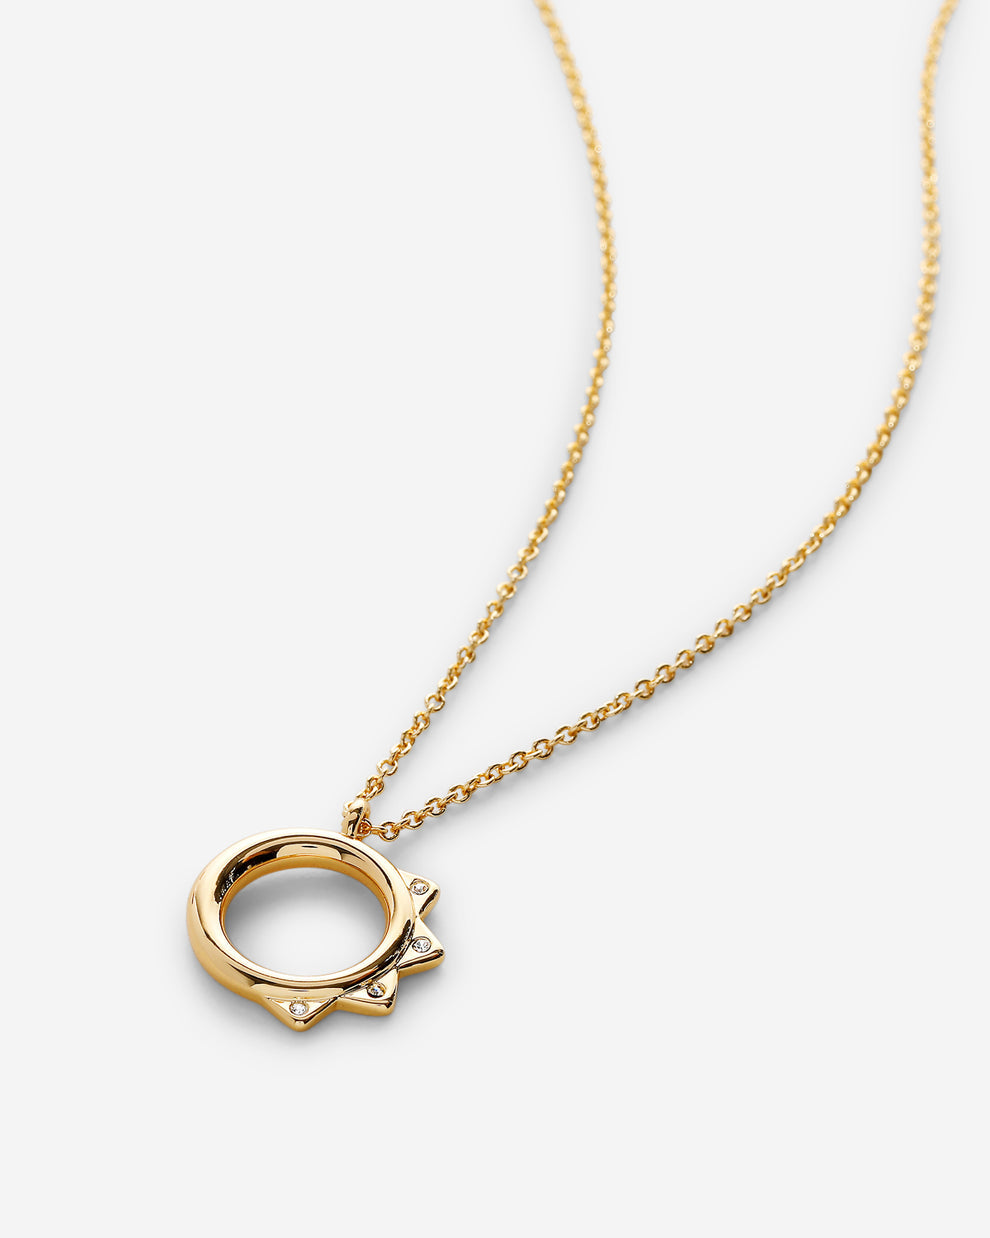 Bryan Anthonys "Squad" Necklace-Gold